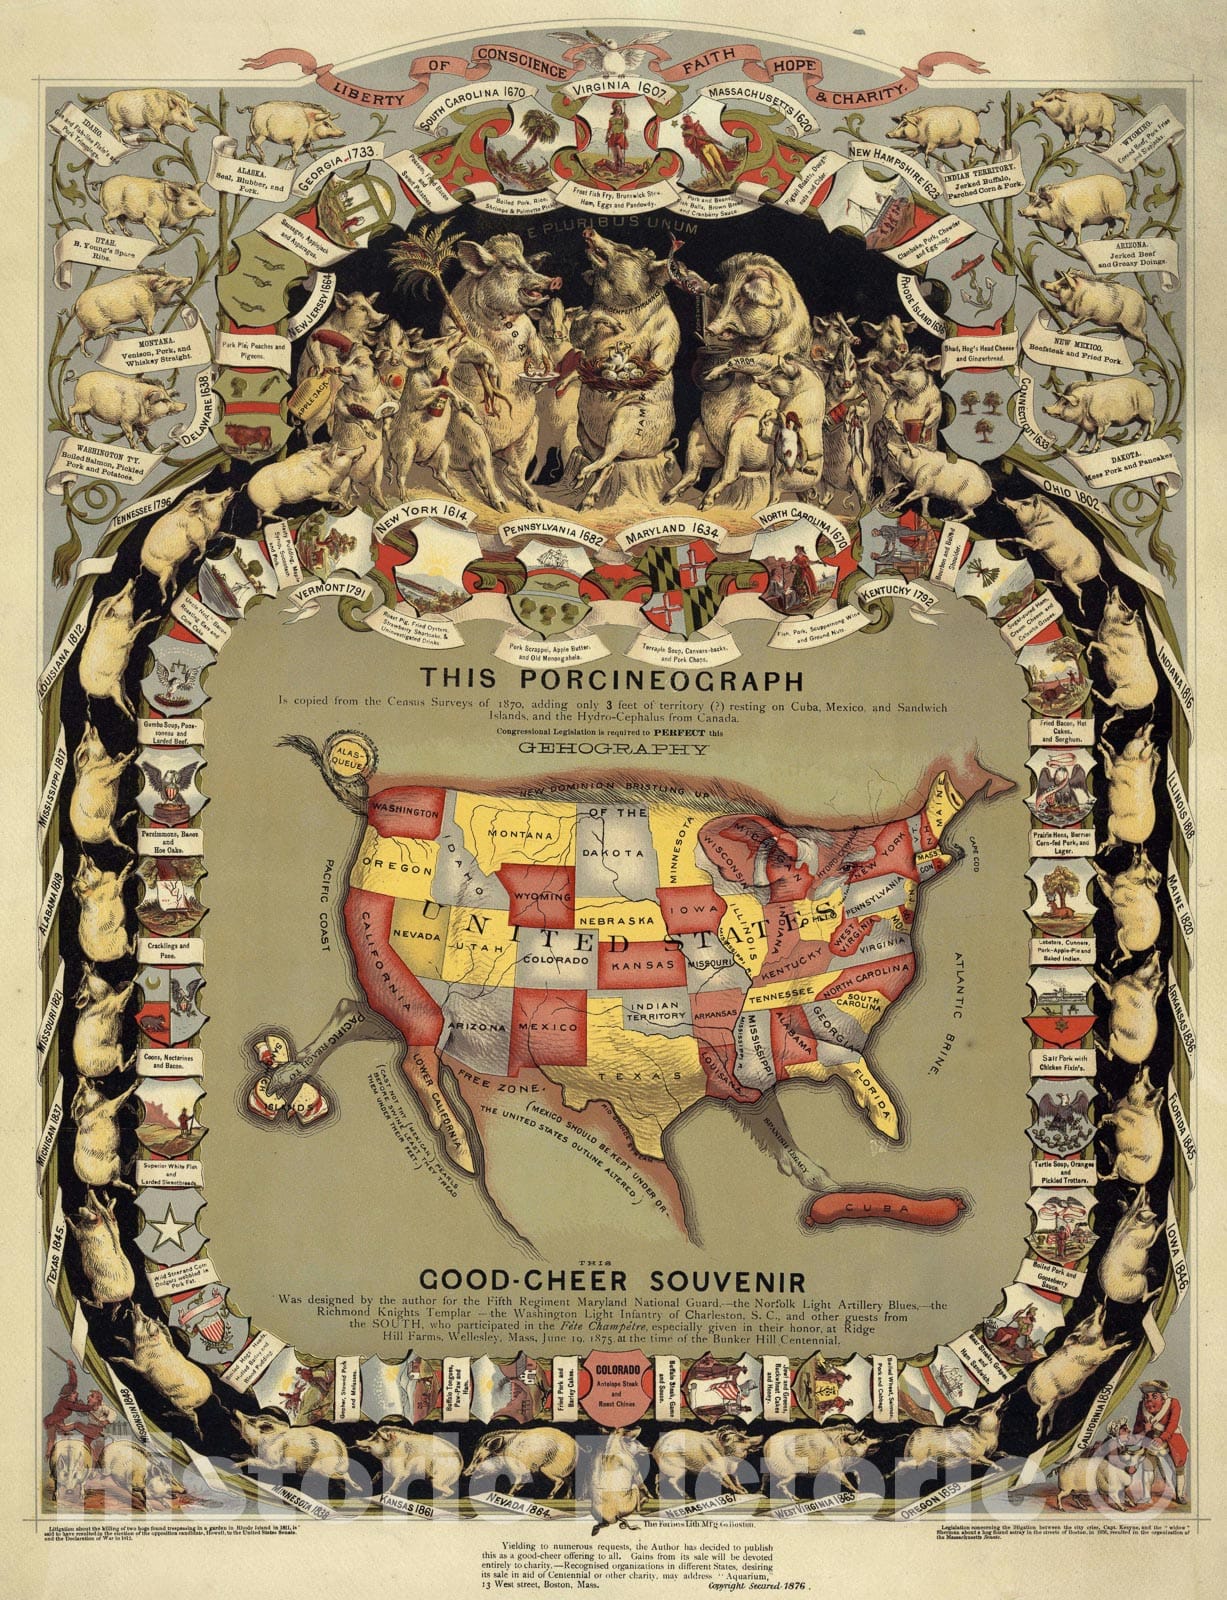 Historic Map : The United States "as Pig", Baker, 1876, Vintage Wall Art